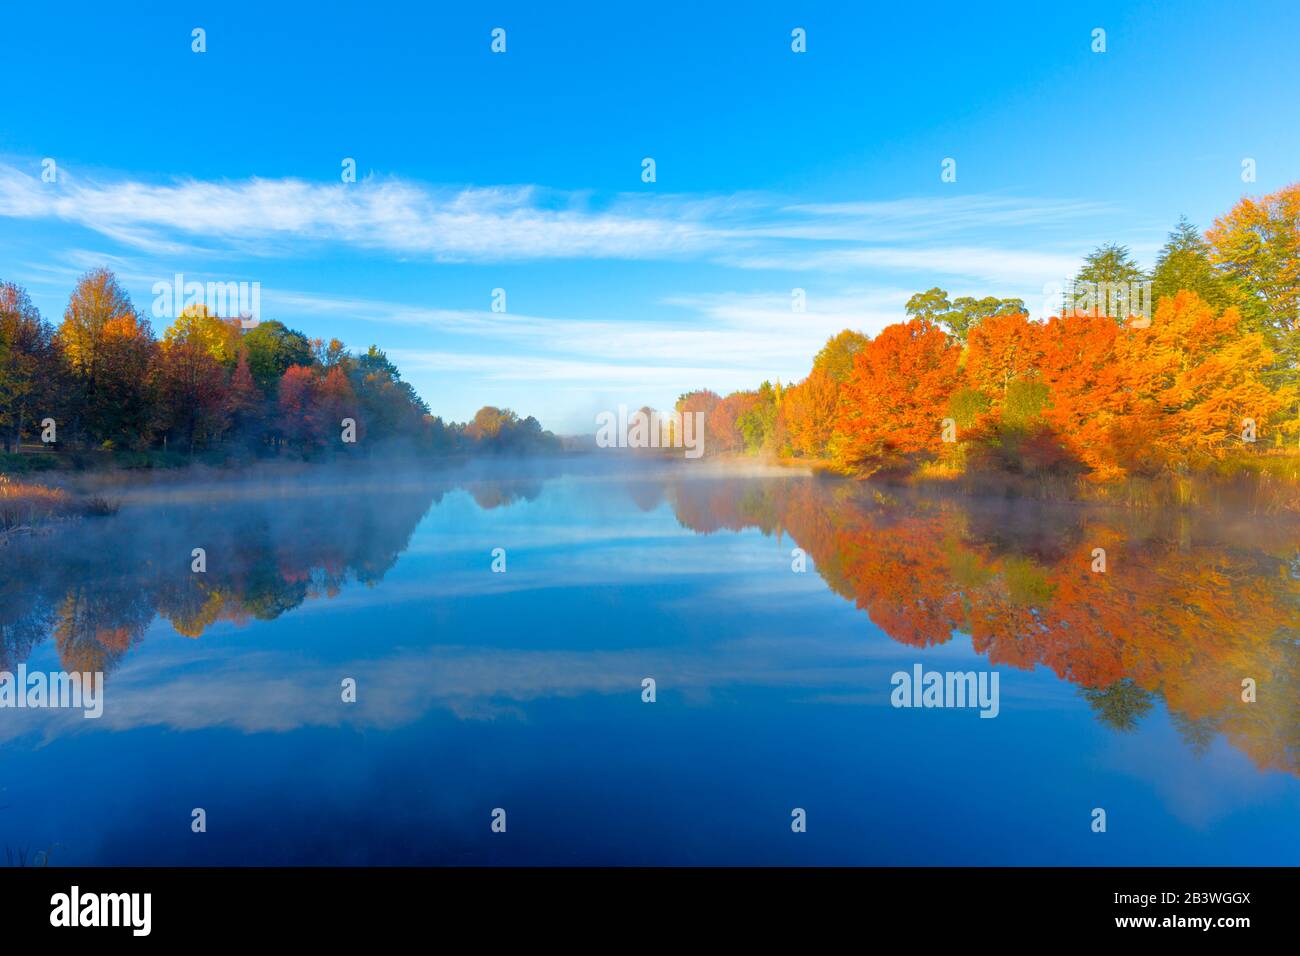 Autumn Trees Reflect On The Water Stock Photo Alamy